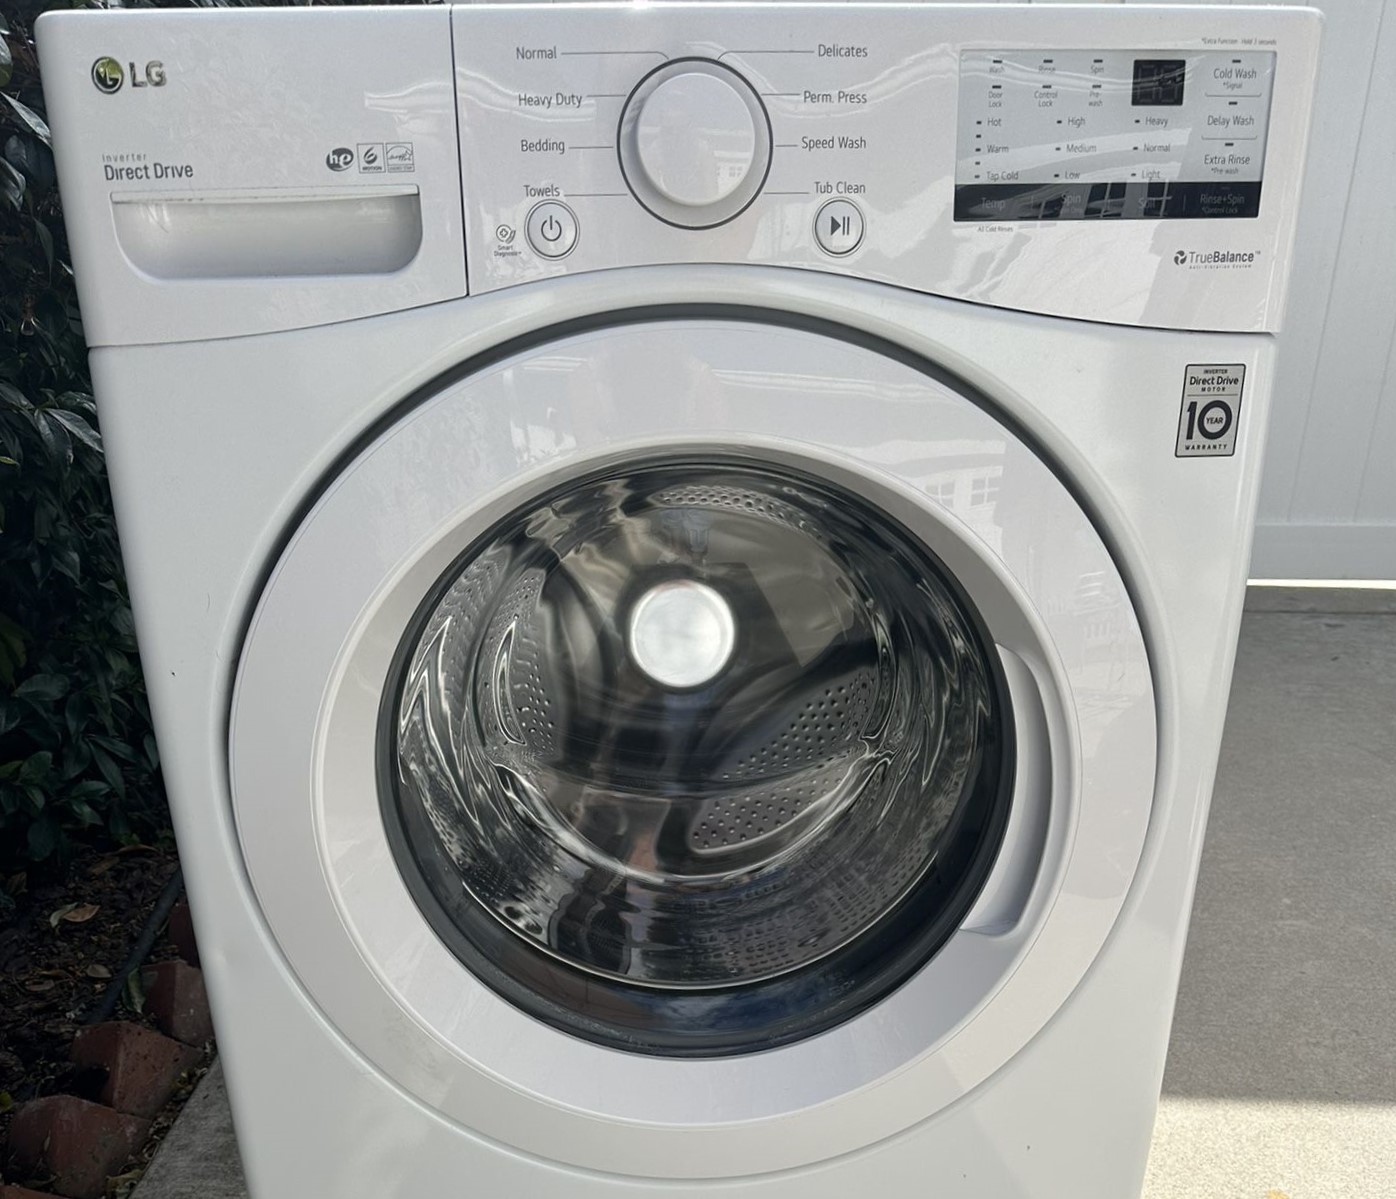 How To Fix The Error Code LC1 For LG Washing Machine